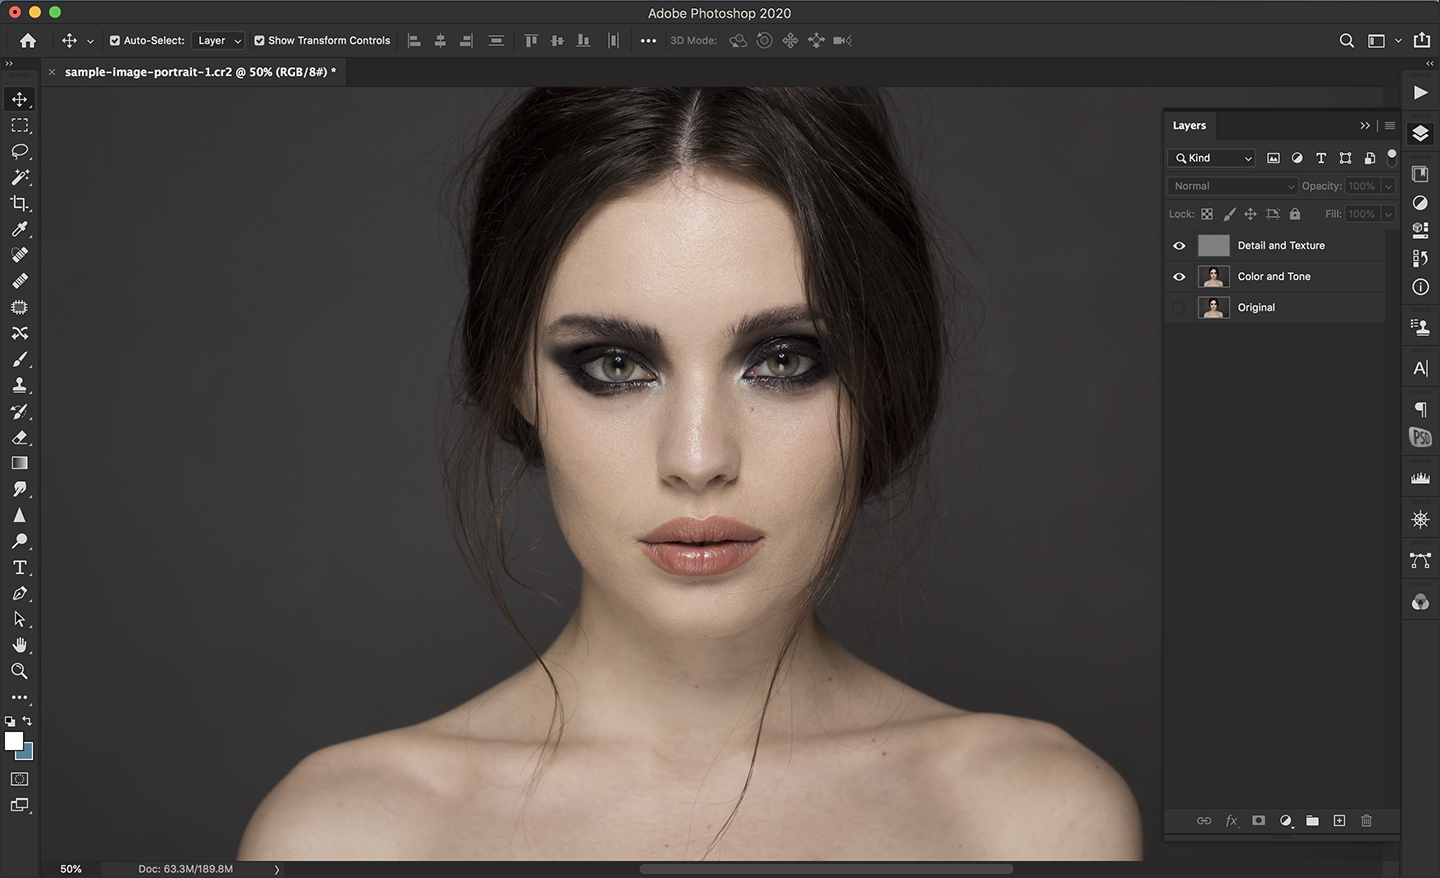 Proceed with your preferred retouching tools